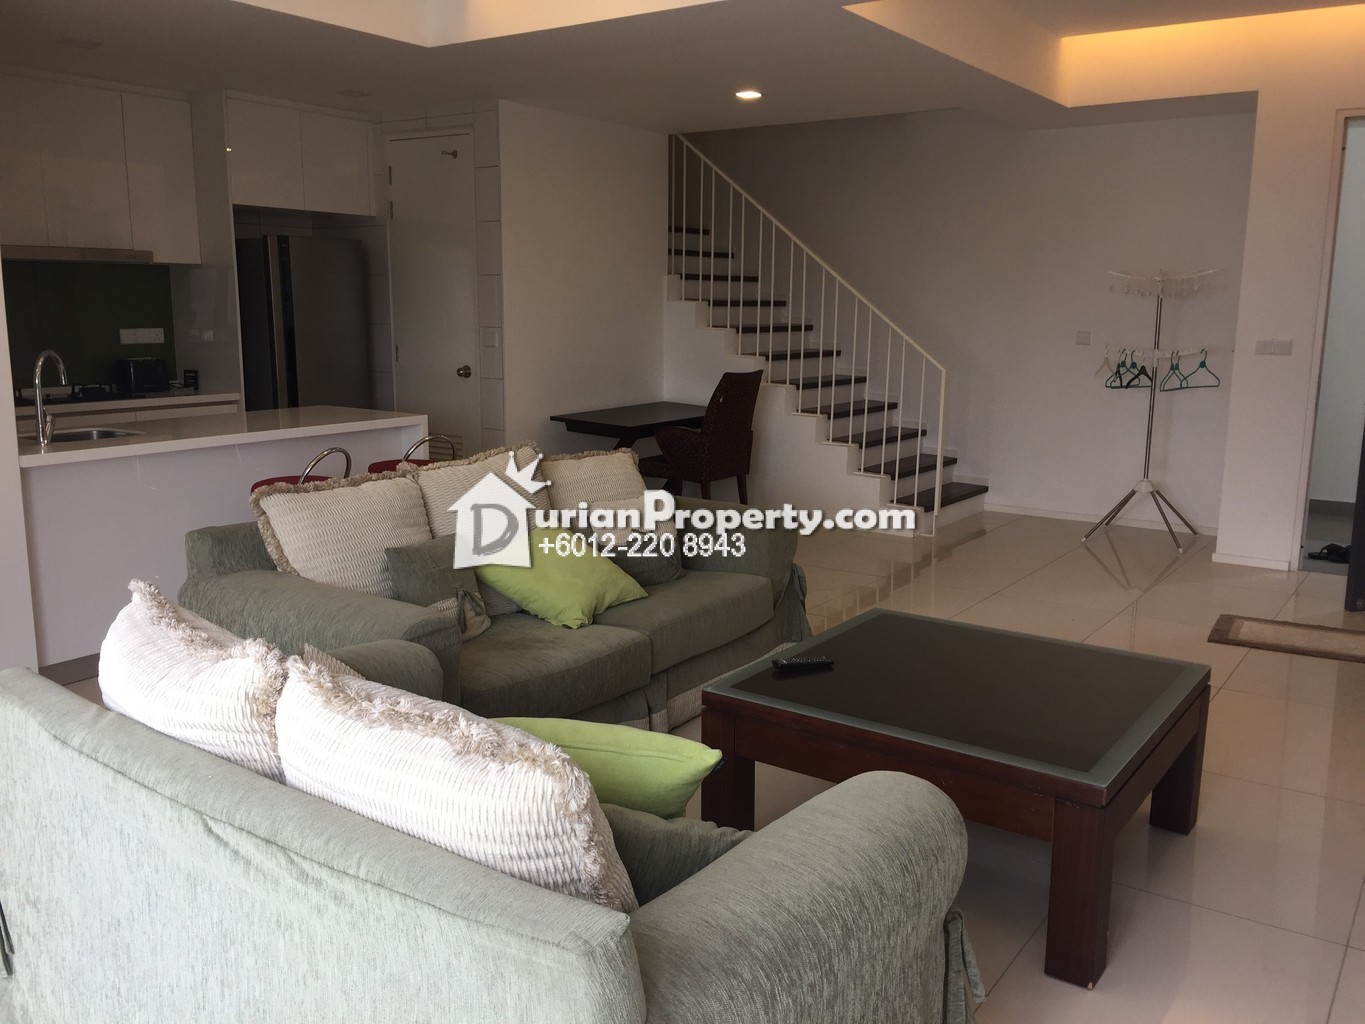 Condo Duplex For Sale At The Breezeway Desa Parkcity For Rm 1 400 000 By Yunsyn Durianproperty